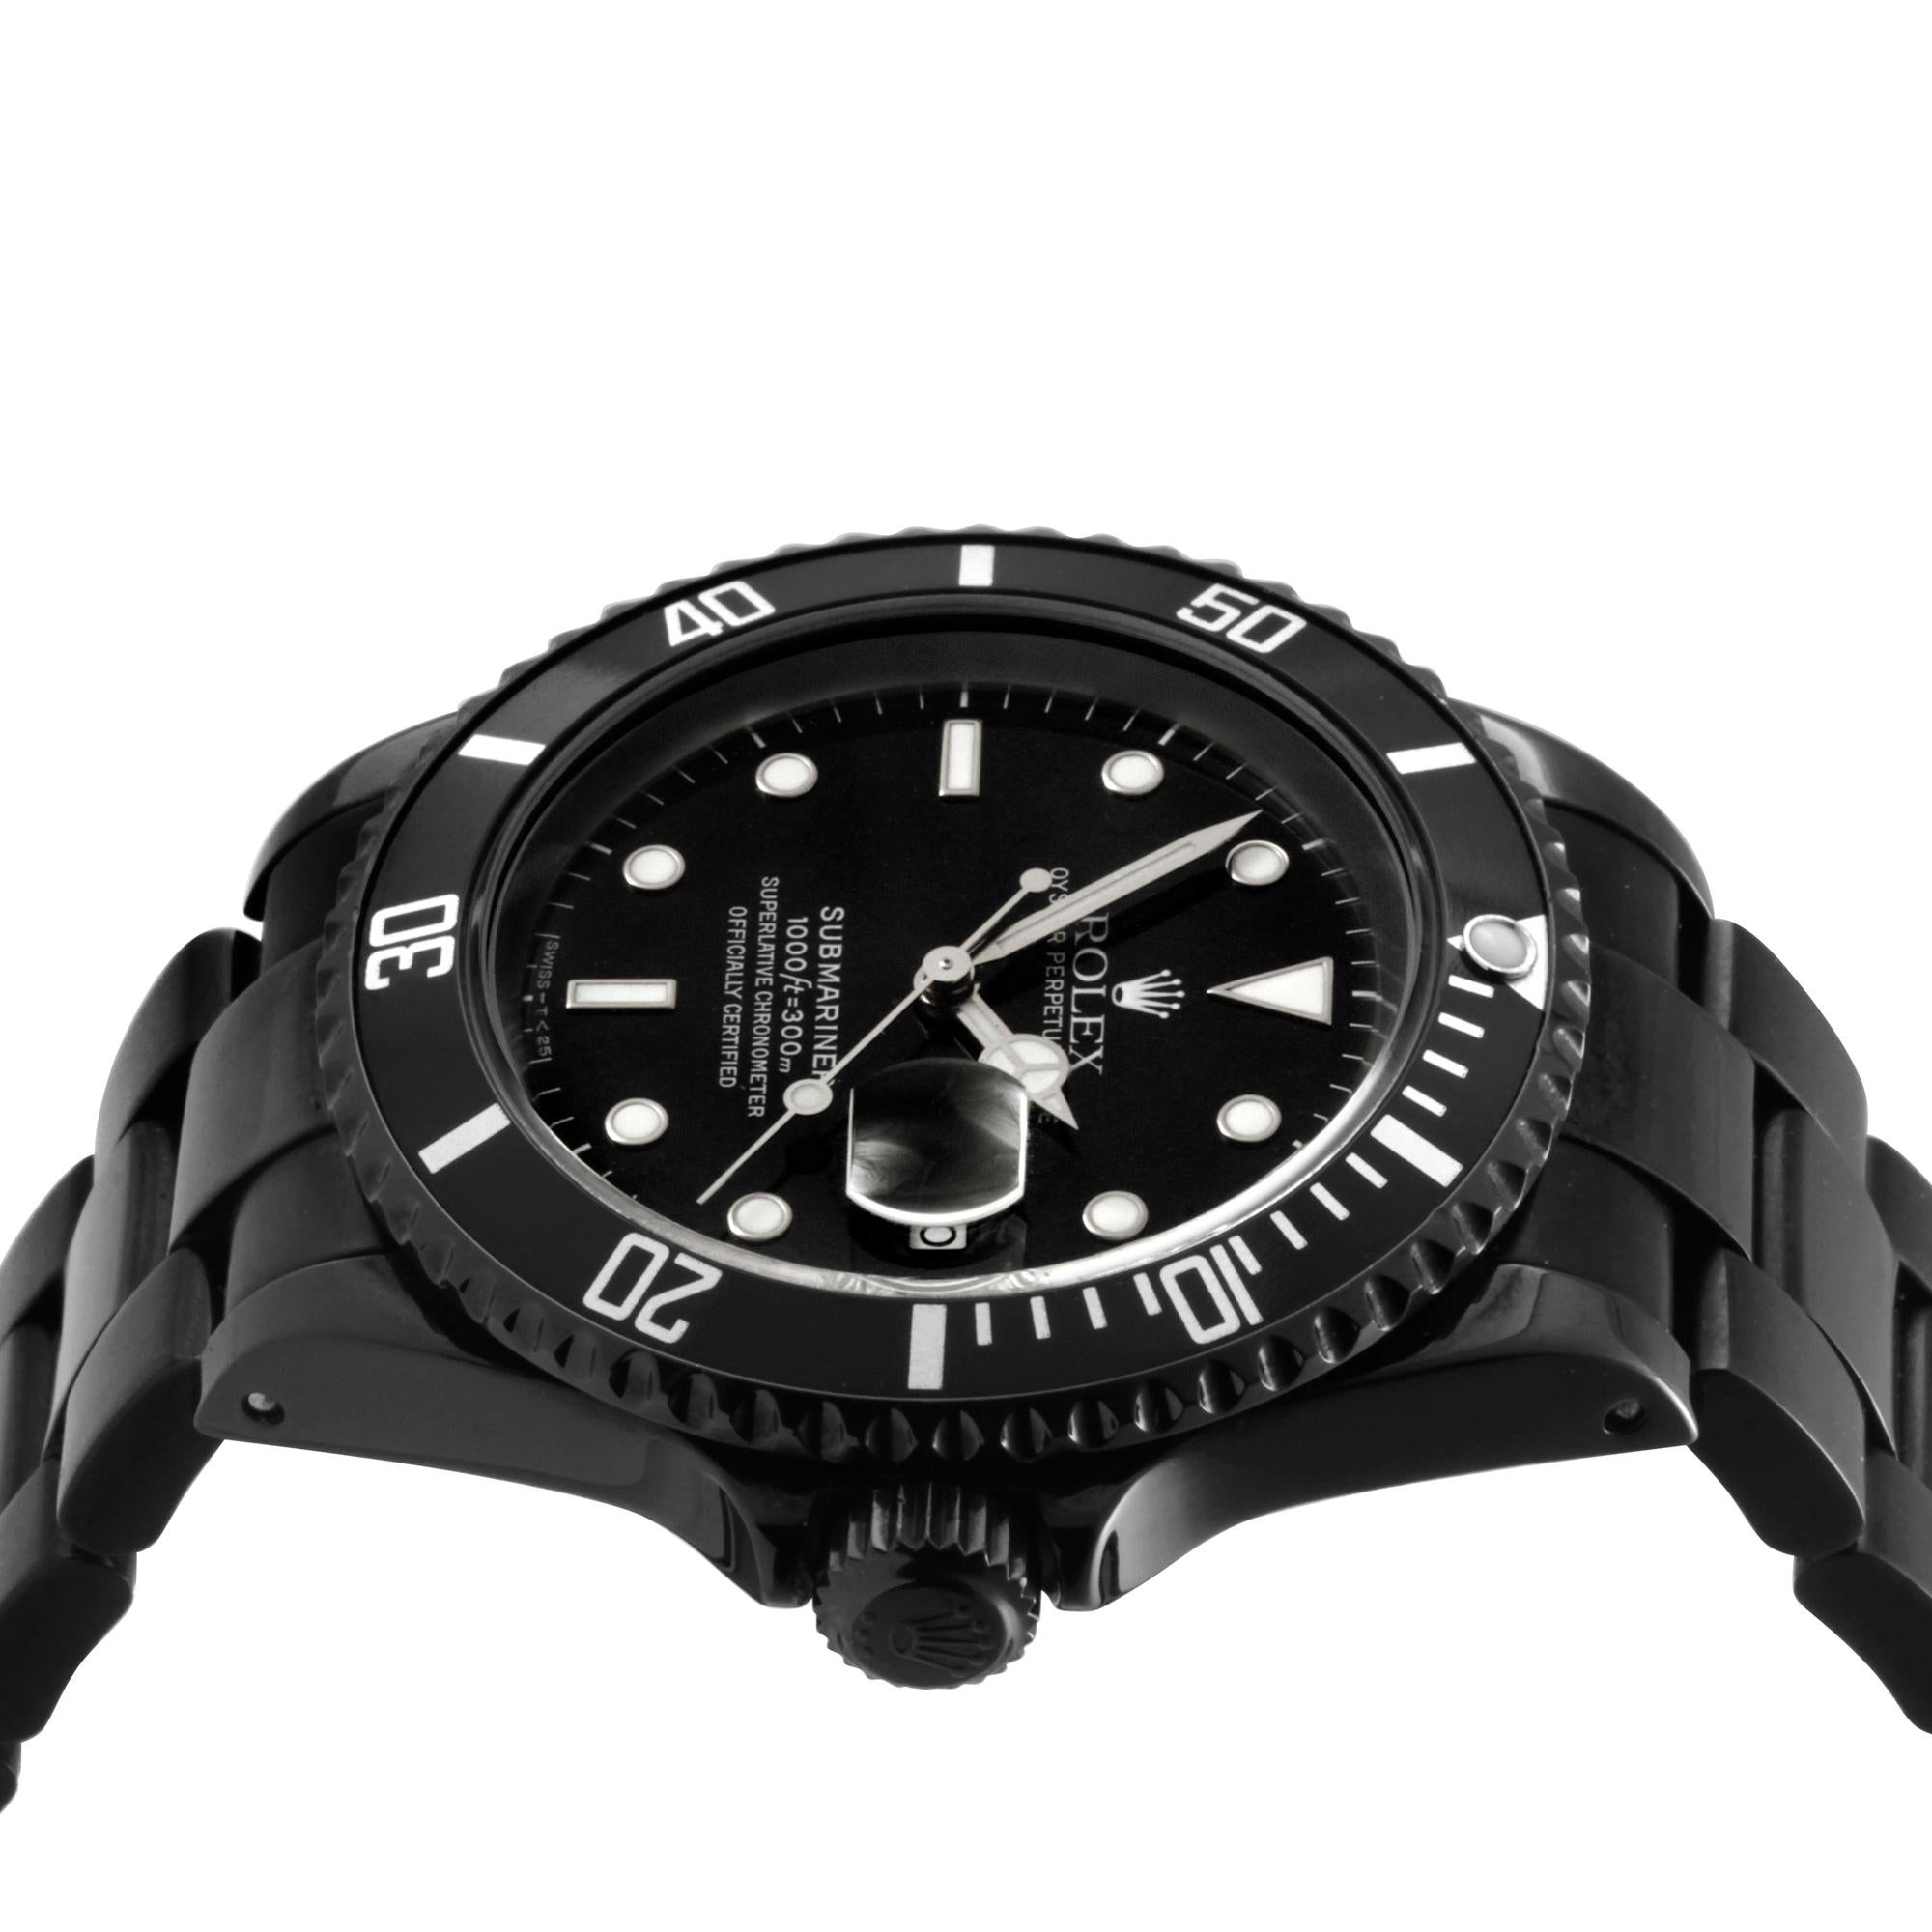 (Watch description.)
Brand - Rolex
Model - 16610 Submariner
Metals - Stainless steel (DLC-PVD BLACK COATED)
Case size - 40mm
Dial - Rolex Black Sub
Bezel - Rotating steel black insert
Crystal - Sapphire
Movement - Rolex CAL-3135
Band - Rolex Oyster